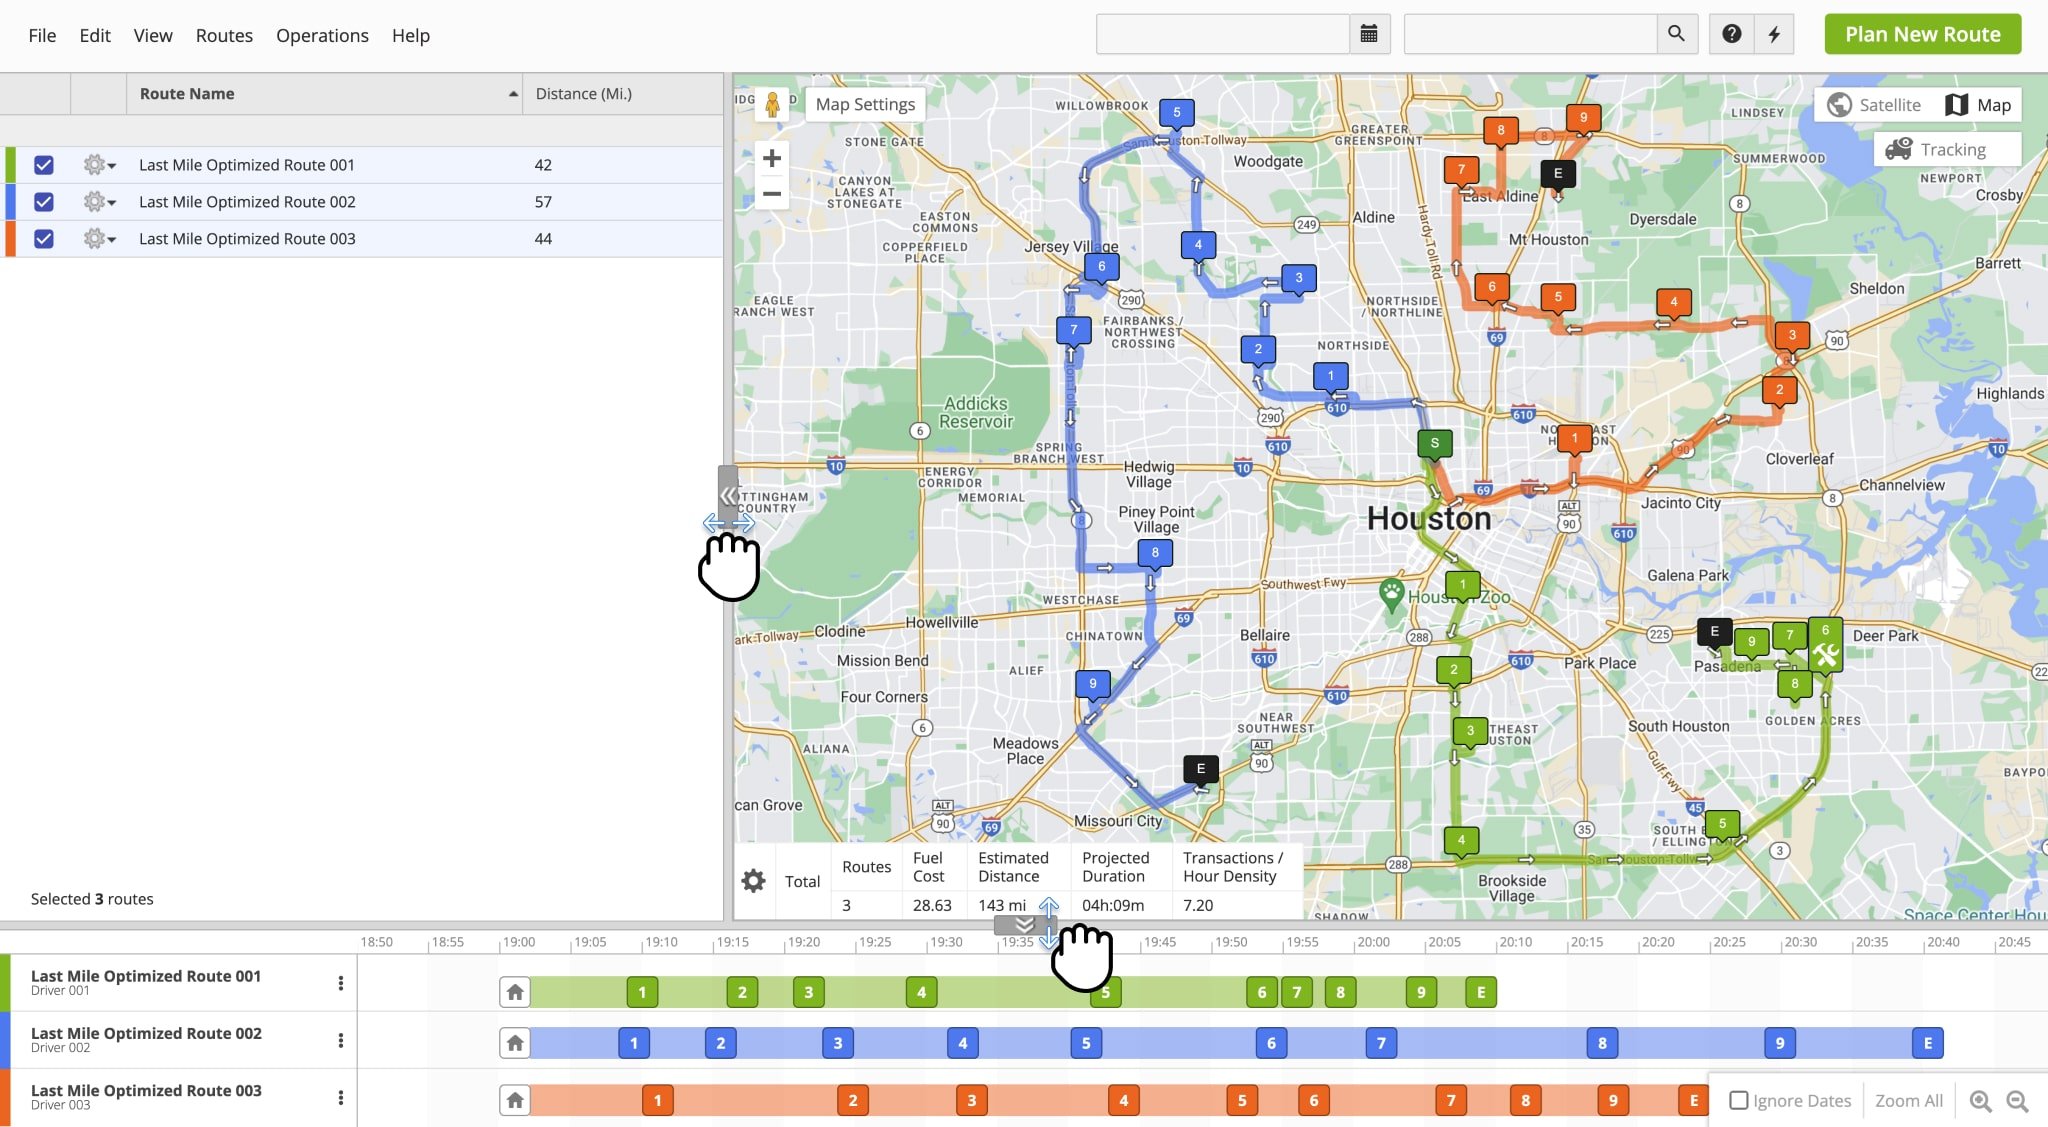 To resize the Interactive Map relative to the Routes Map List and Time Line, click and drag the middle of the panel separators.